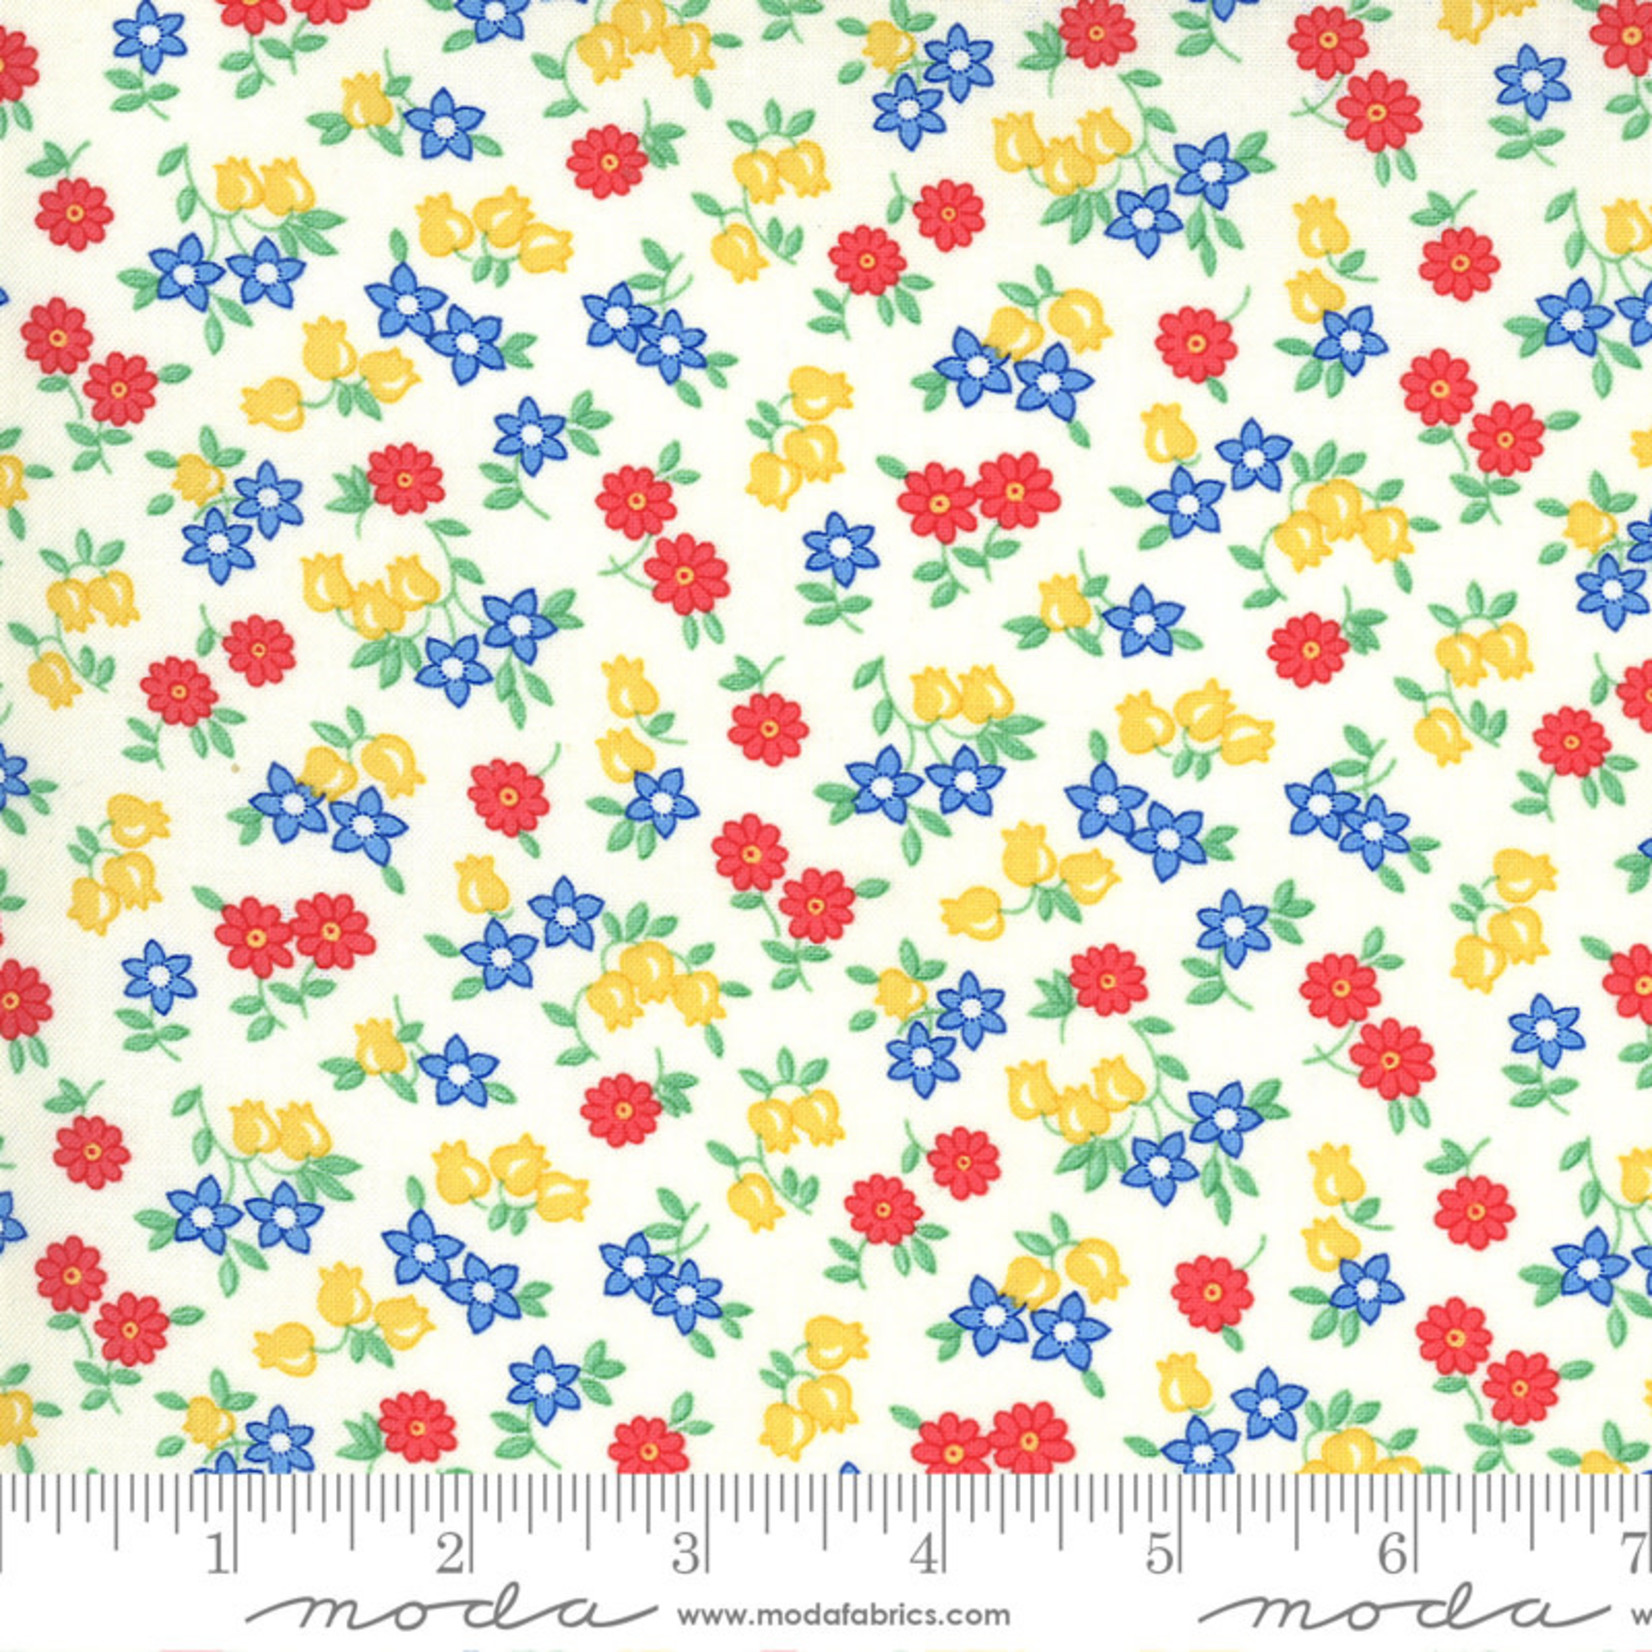 Chloe's Closet 30s Playtime, Posie Party Floral, Eggshell 33594-11 $0.20 per cm or $20/m